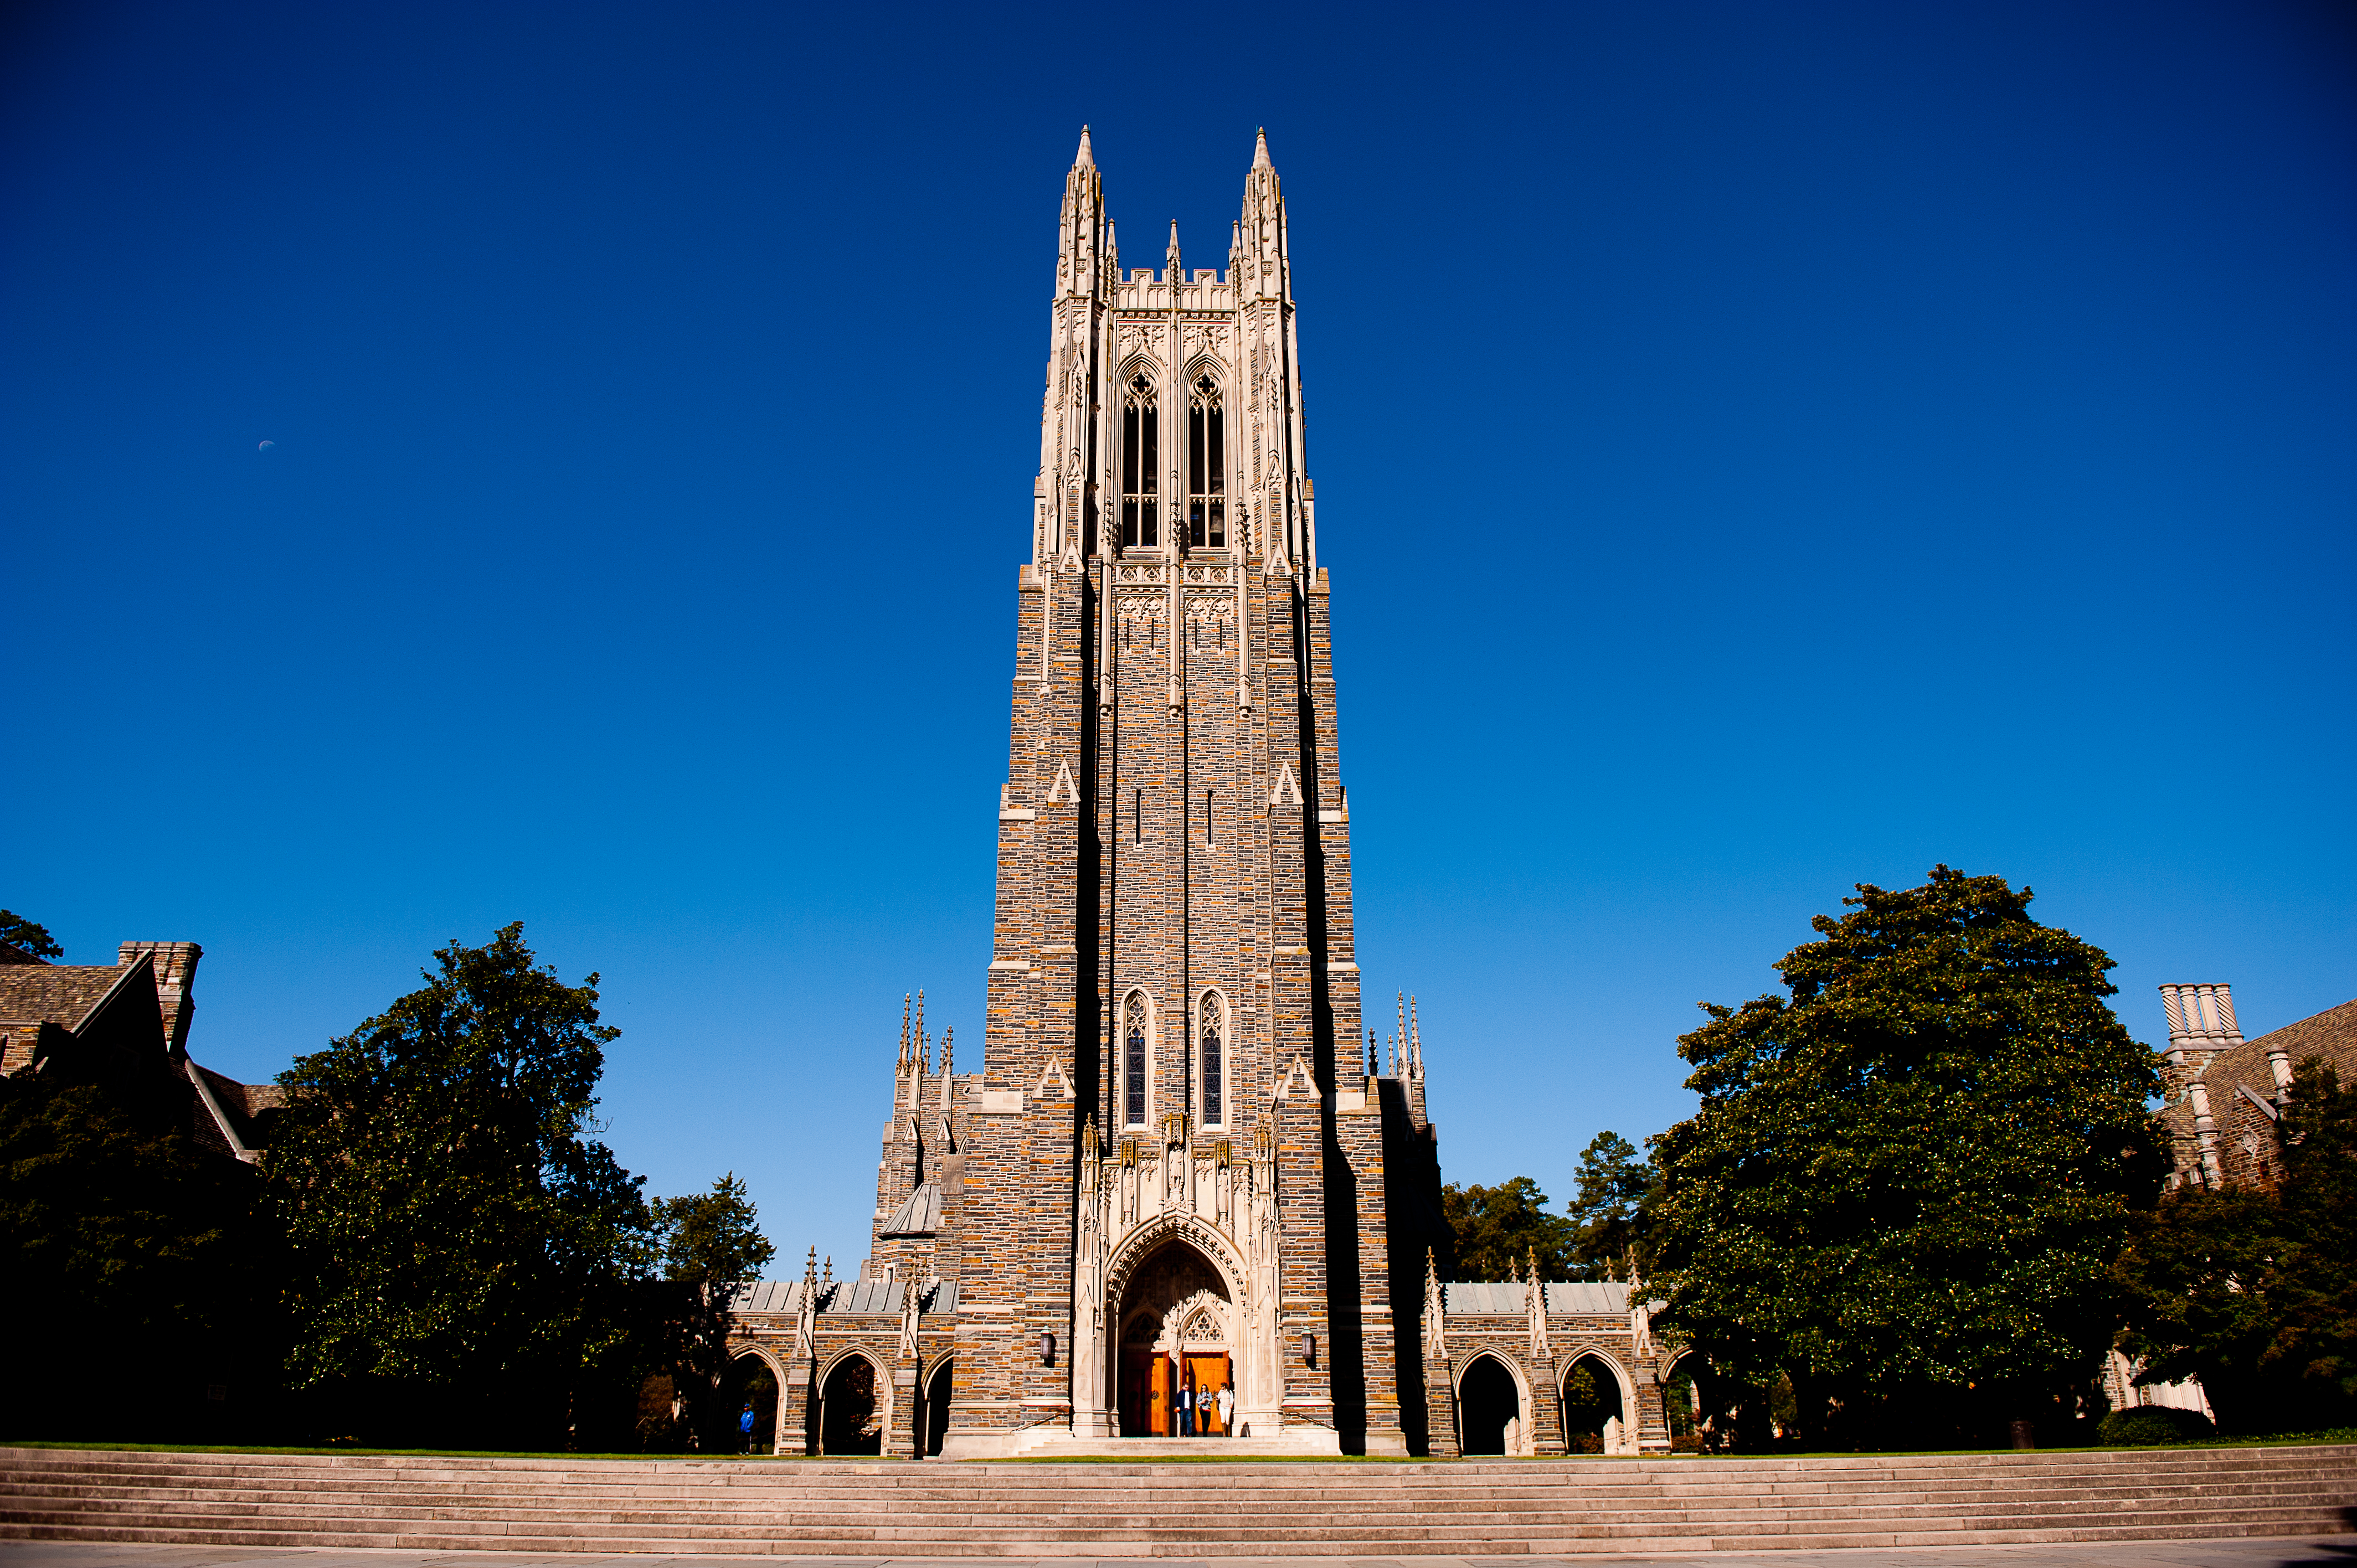 A general view of the Duke University Chapel on campus of Duke University on Oct. 26, 2013 in Durham, North Carolina.